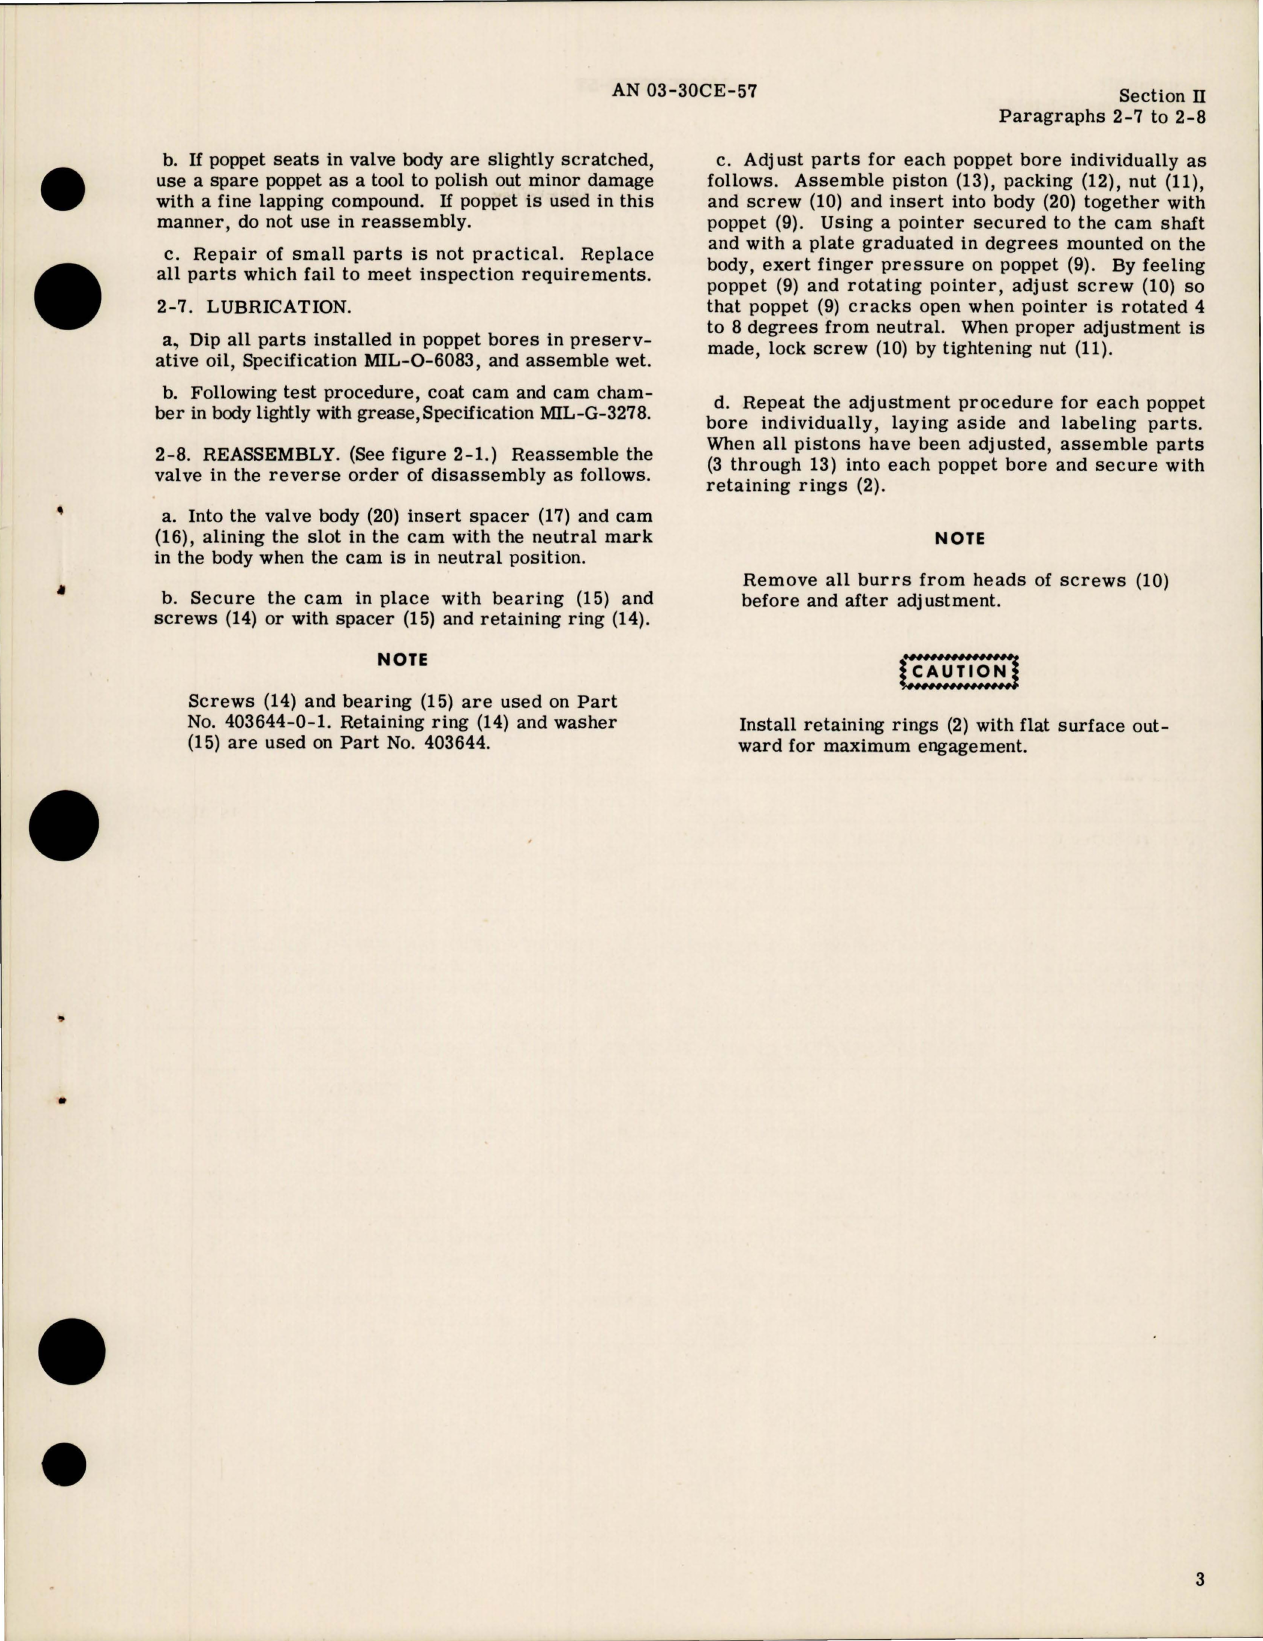 Sample page 5 from AirCorps Library document: Overhaul Instructions for Four-Way Hydraulic Selector Valves - 1500 psi 